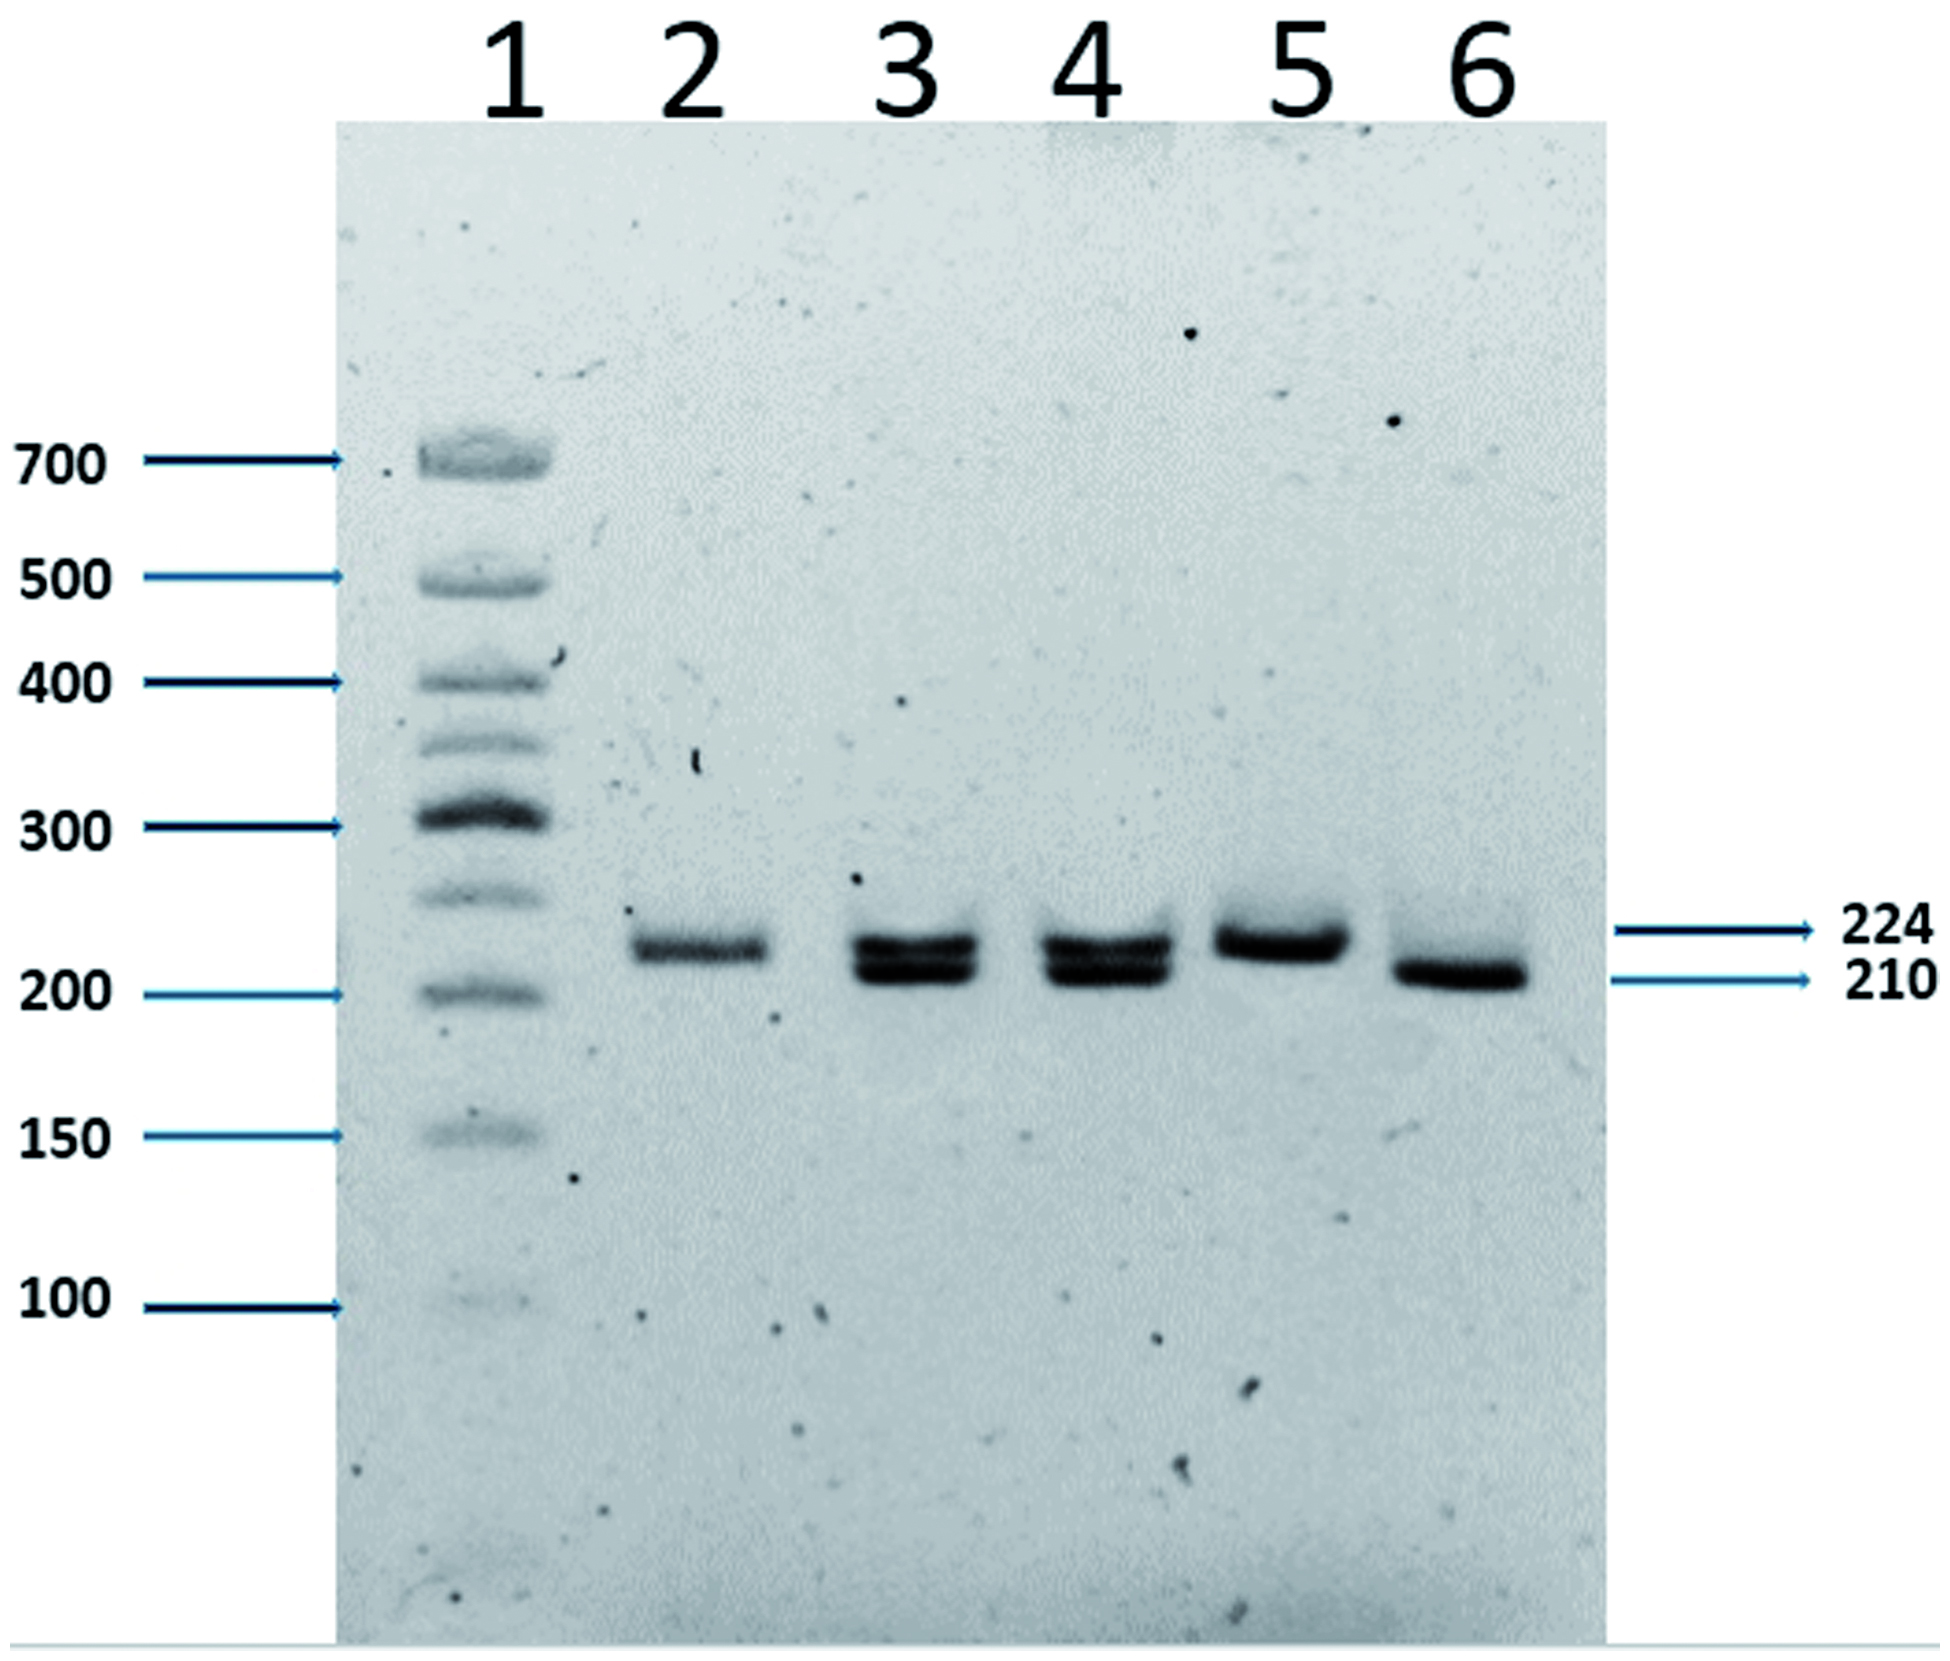 Figure 3. Detection of 14-bp deletion/insertion polymorphisms using electrophoresis. Lane 1: 50-bp ladder; lanes 2 and 5: homozygote for insertion; lanes 3 and 4: heterozygote; lane 6: homozygote for deletion. The figure shows a representative gel. Values to the right indicate the molecular weights of the PCR products (224 or 210 bp) depending on insertion or deletion of the 14 bp in exon 8.